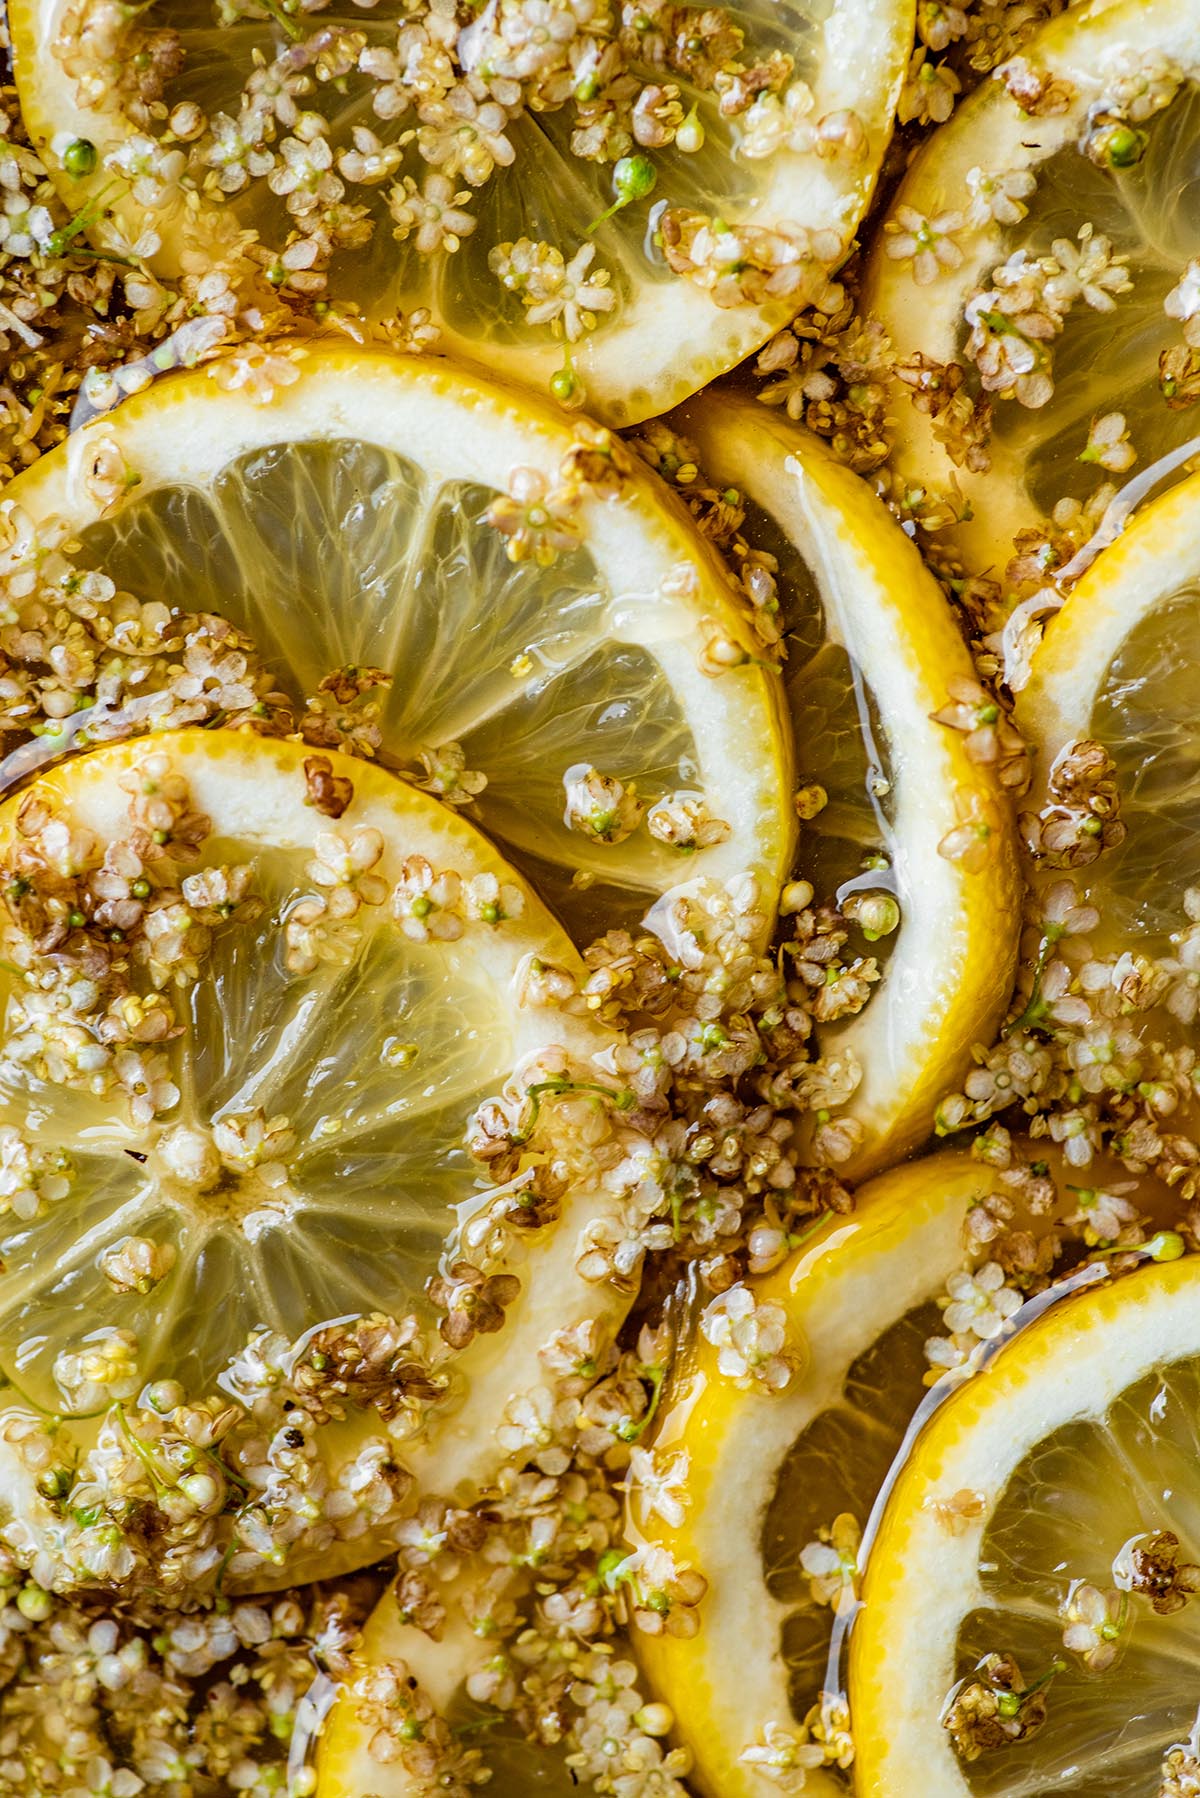 Close up of lemon slices with elderflowers floating in a bowl.